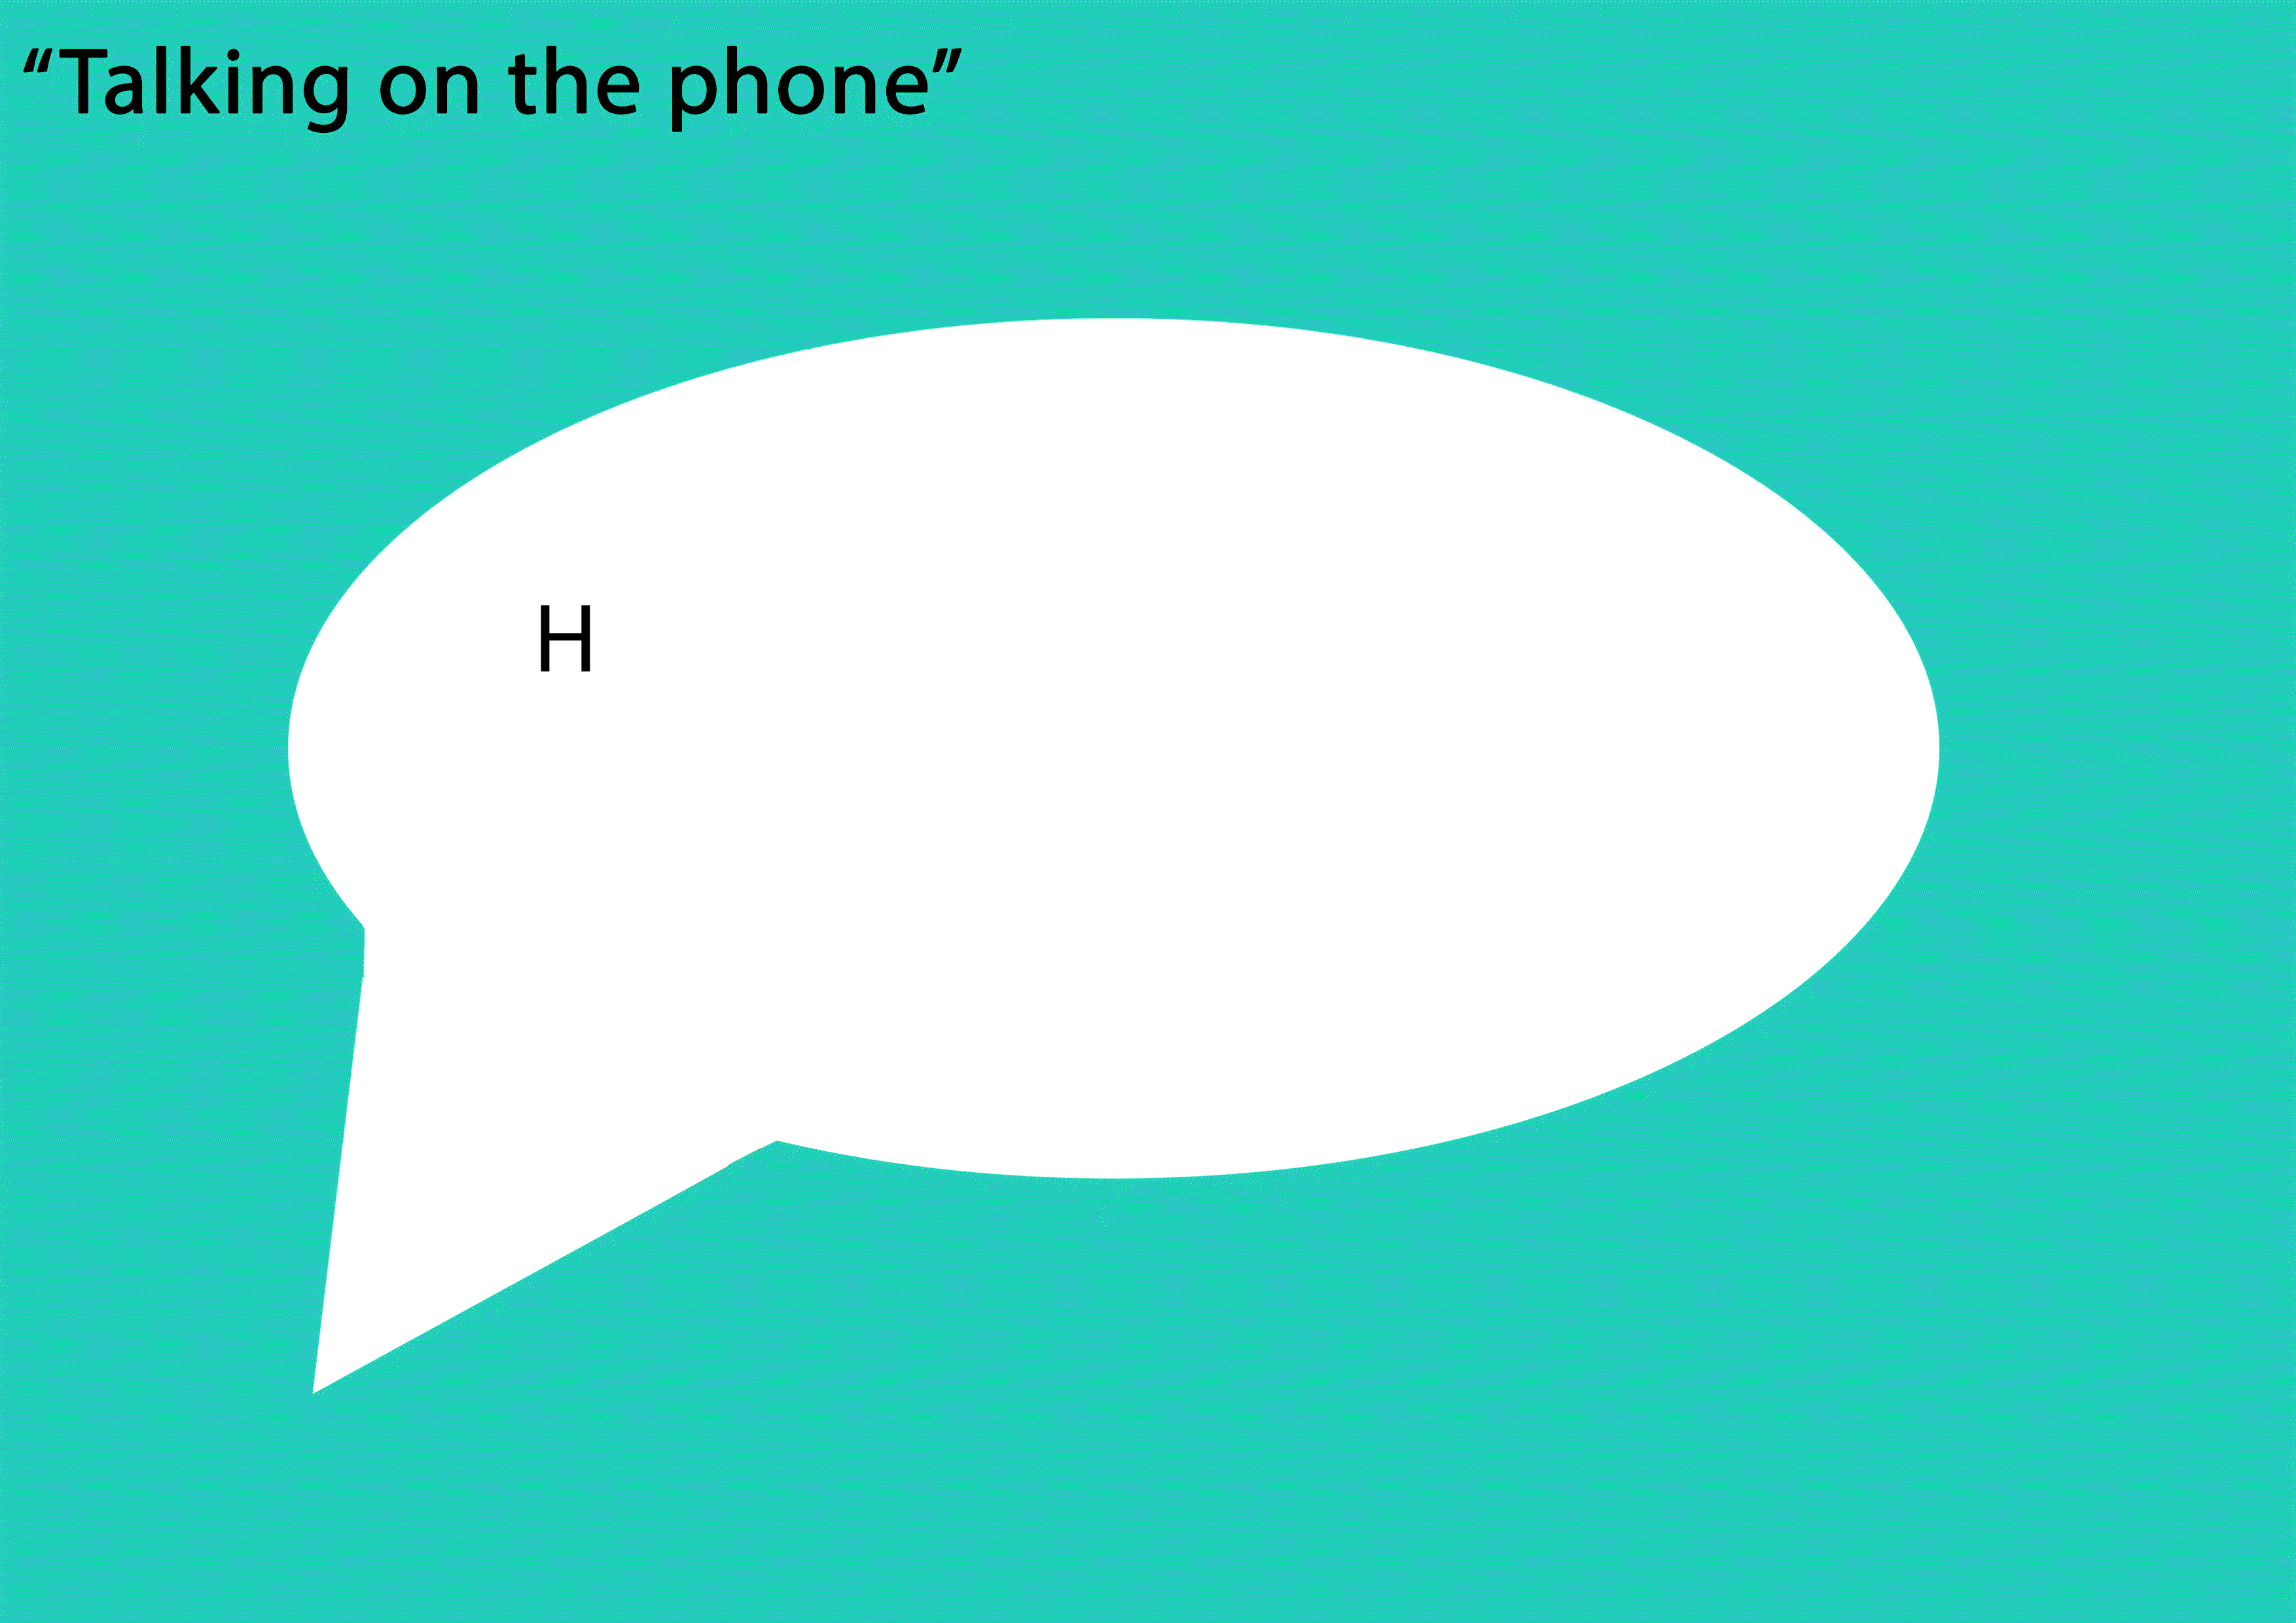 An illustrated speech bubble with text inside showing stammered speech